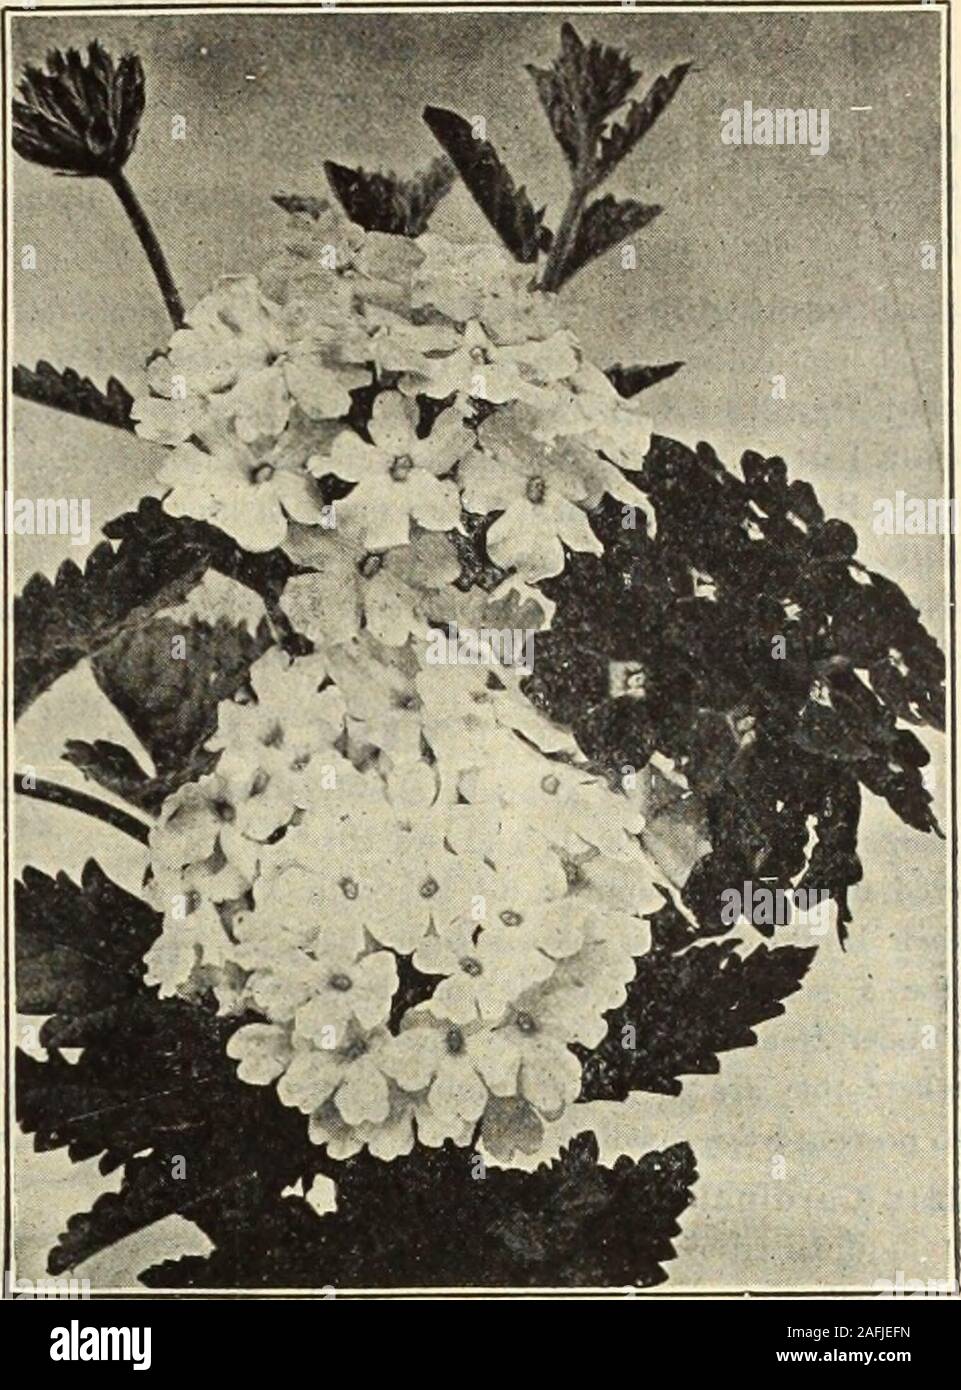 . Dreer's garden book 1915. oz., 15 cts 5 VINCA (Madigascar Periwinkle, or Old Maid). Ornamental free-blooming plantsflowering bedding plants we have,early indoors or in a hot-bed, butthey begin blooming in August fromseed sown out of doors in May, or assoon as the ground is warm, con-tinuing until frost; or they may bepotted and kept in bloom throughthe winter; a fine cut flower, everybud opening when placed in water.2 feet. (See cut.) 4381 Rosea. Rose, dark eye. . 4382 — Alba. White, crimson eye. 4383 — Alba Pura. Pure white.4390 —Mixed All the colors. J oz., 30 cts and one of the most satis Stock Photo